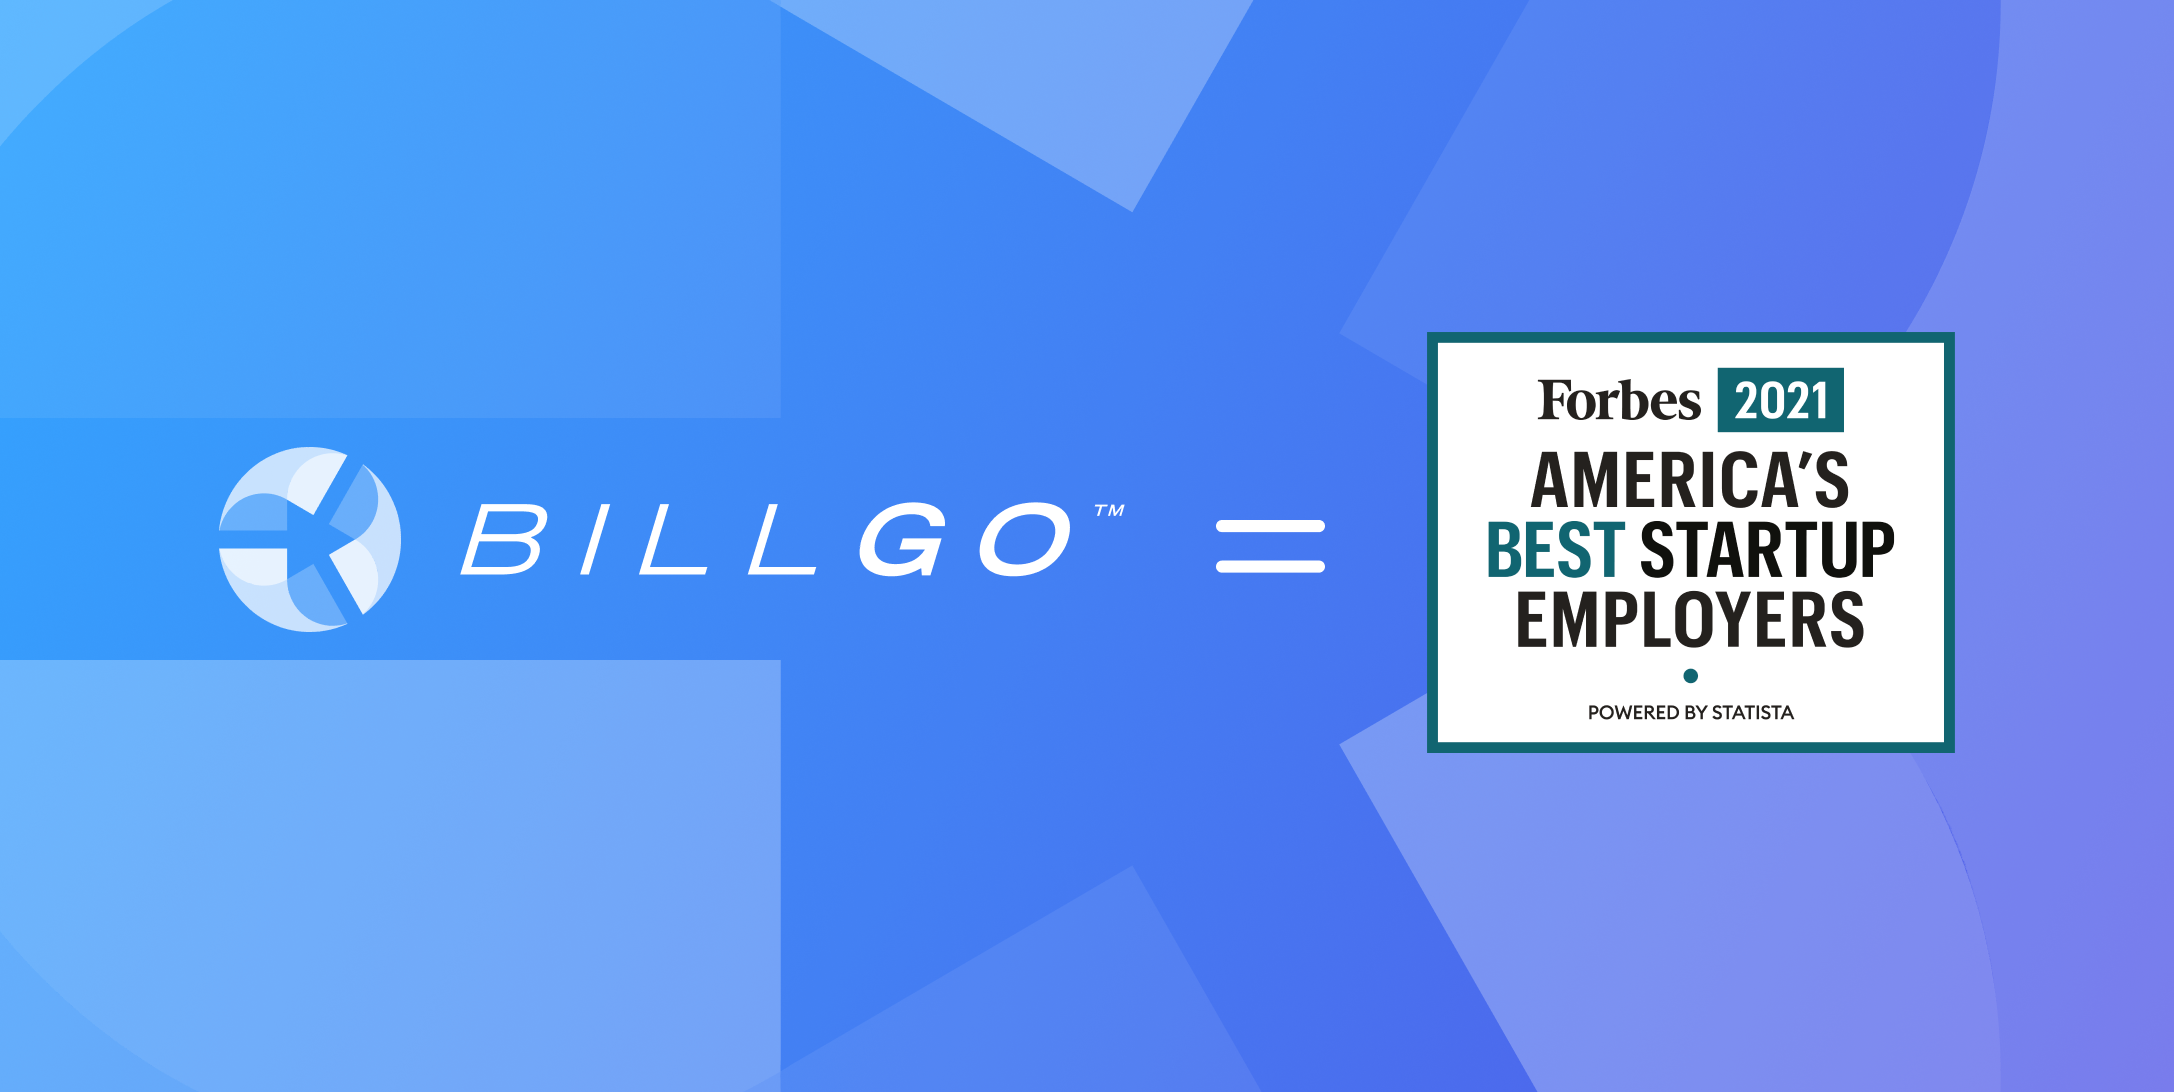 Forbes Names BillGO One of America’s Best Startup Employers for 2021